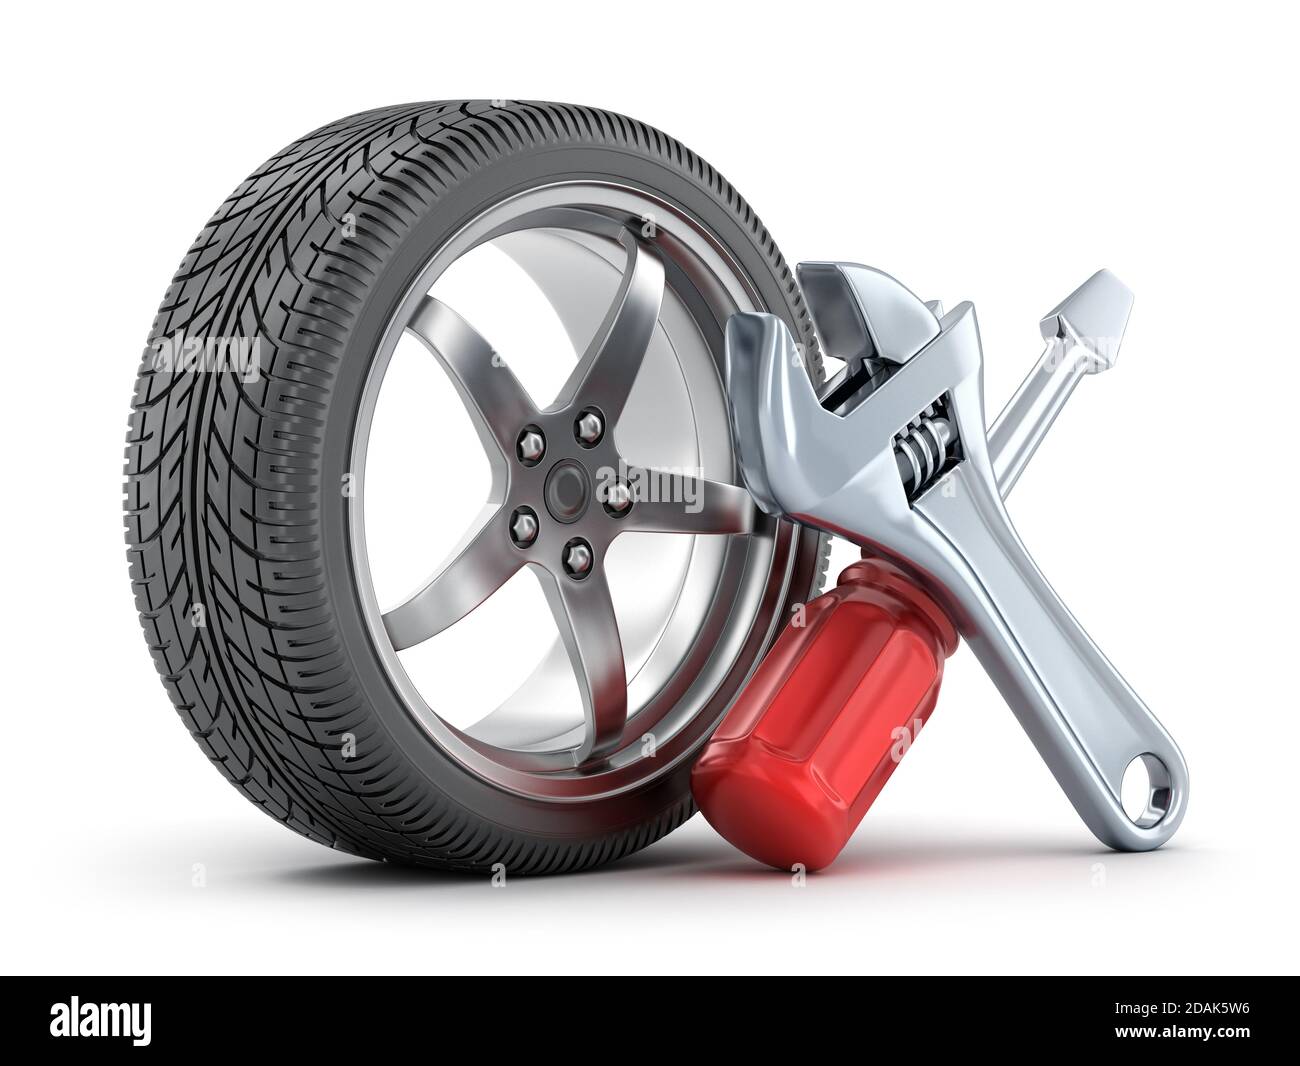 Wheel car and tools on white background. 3d illustration Stock Photo